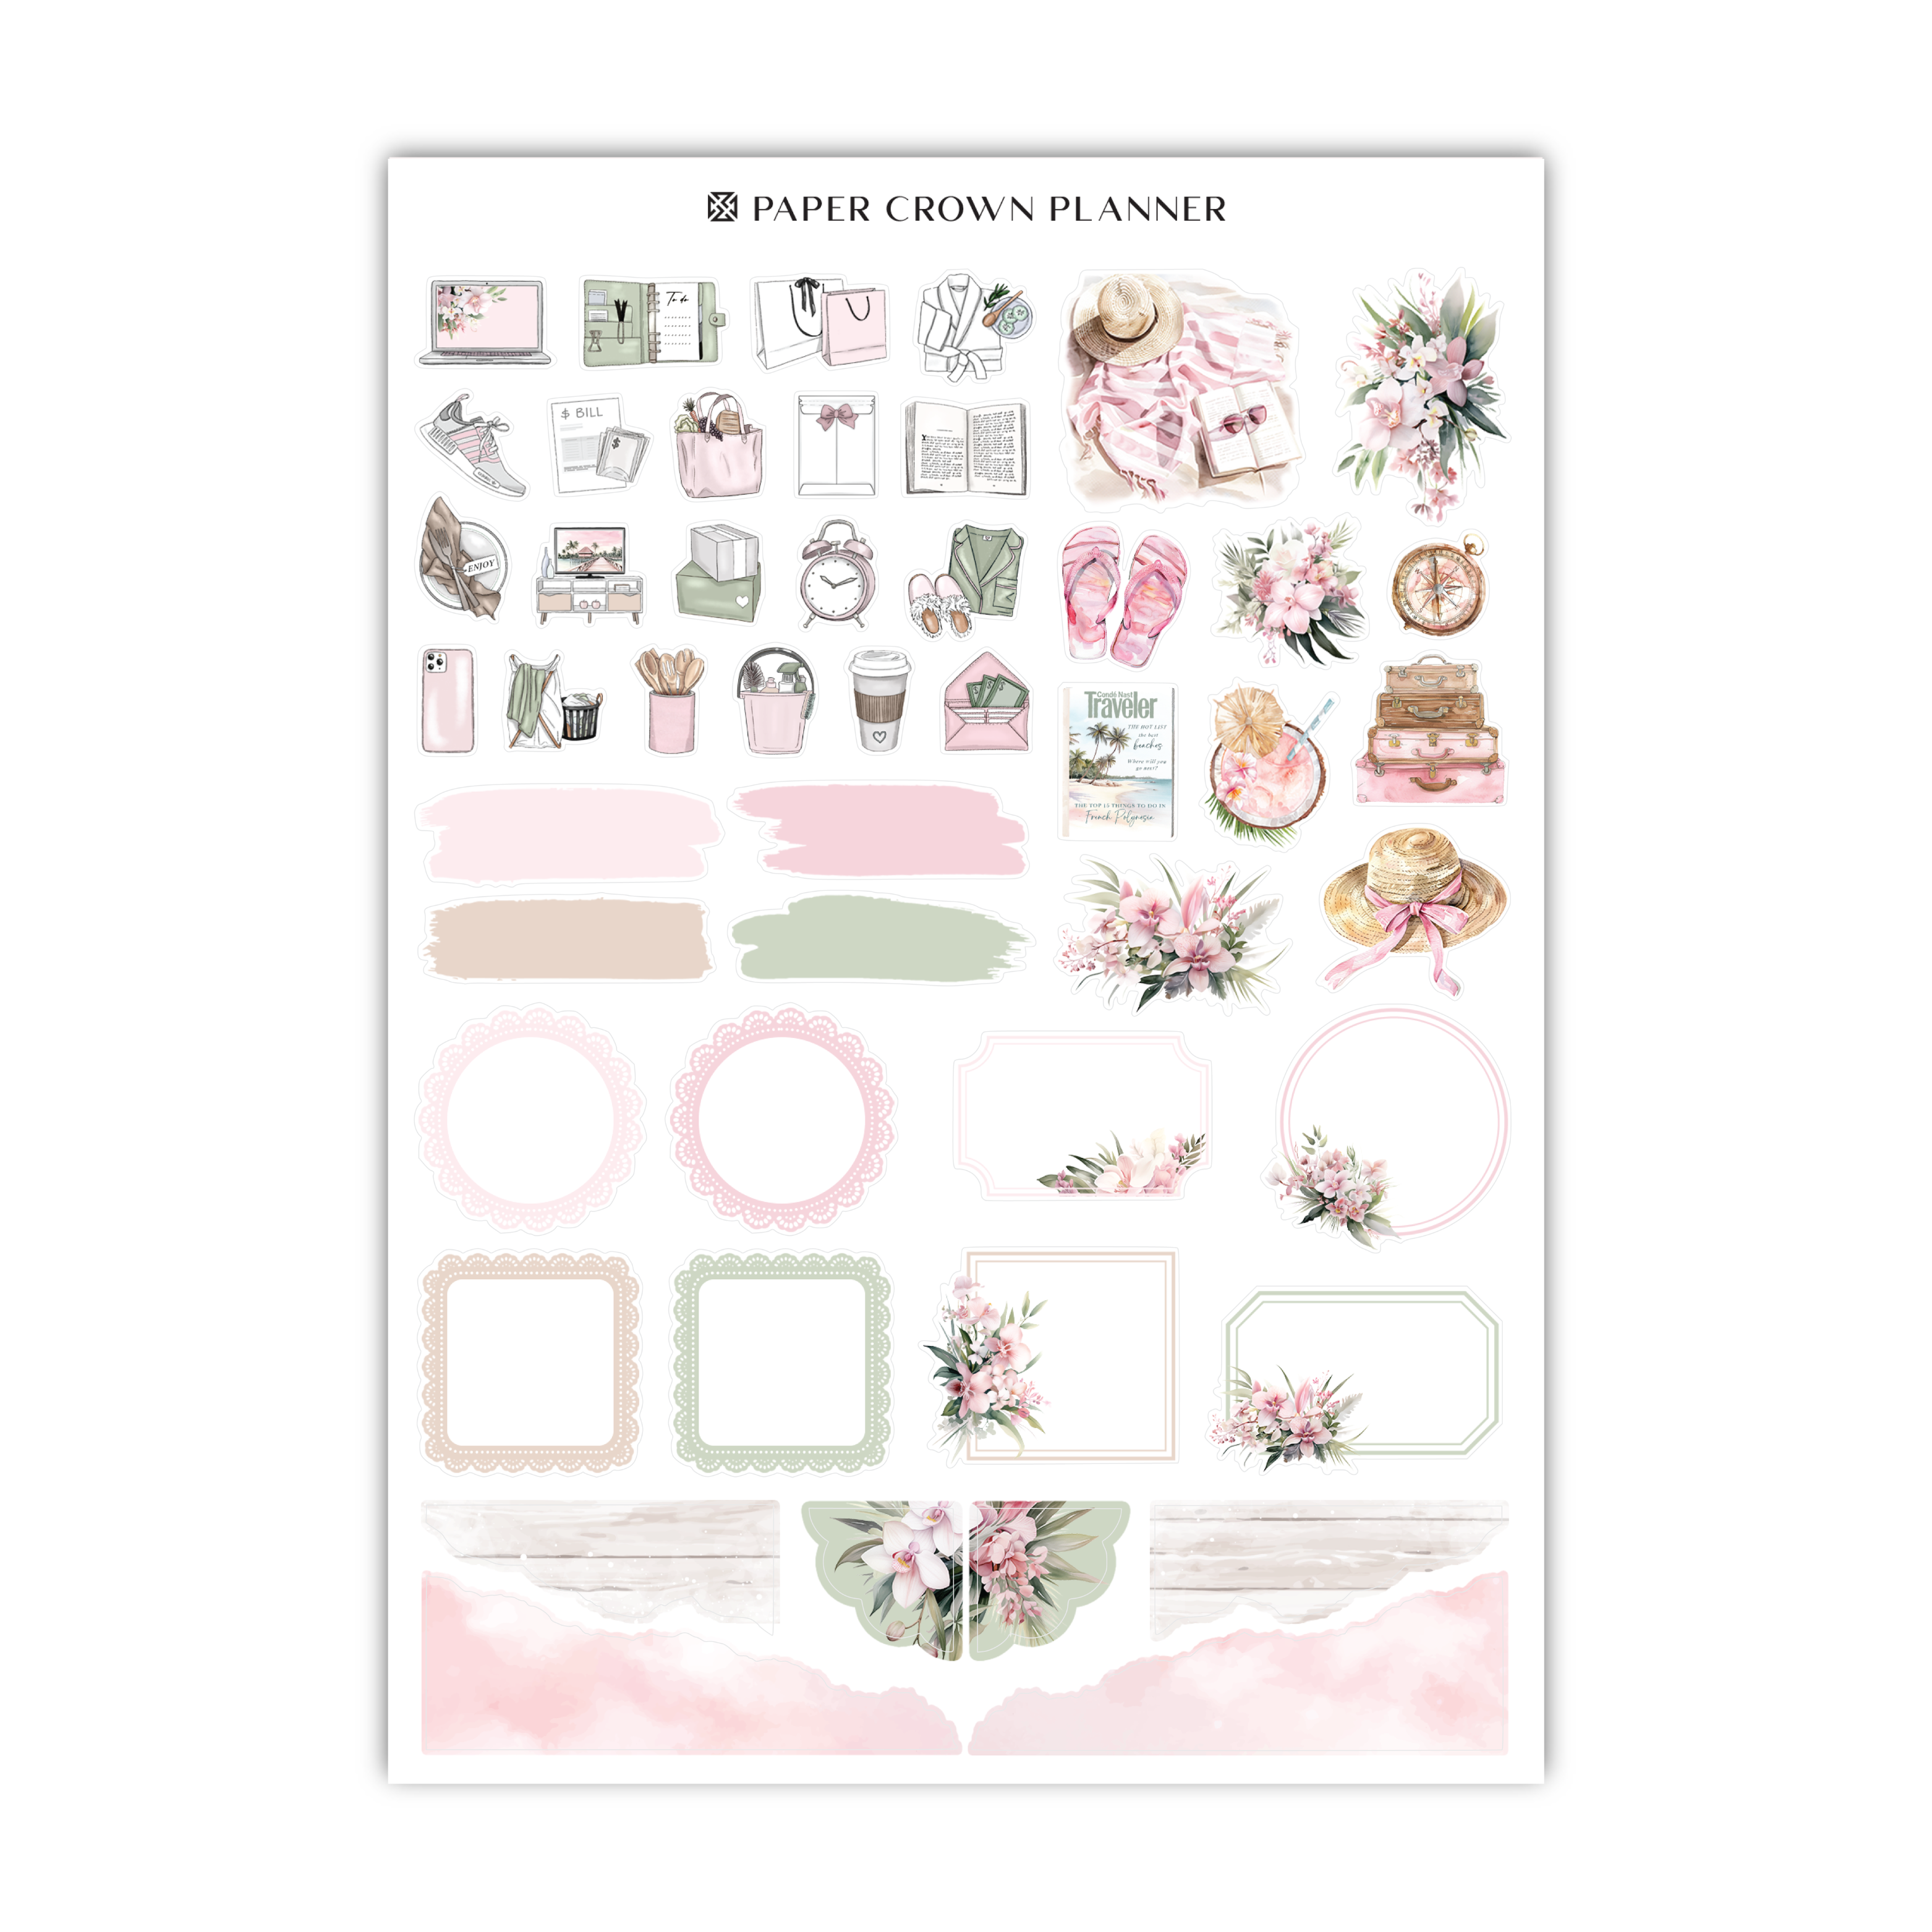 a paper crown planner sticker with pink flowers